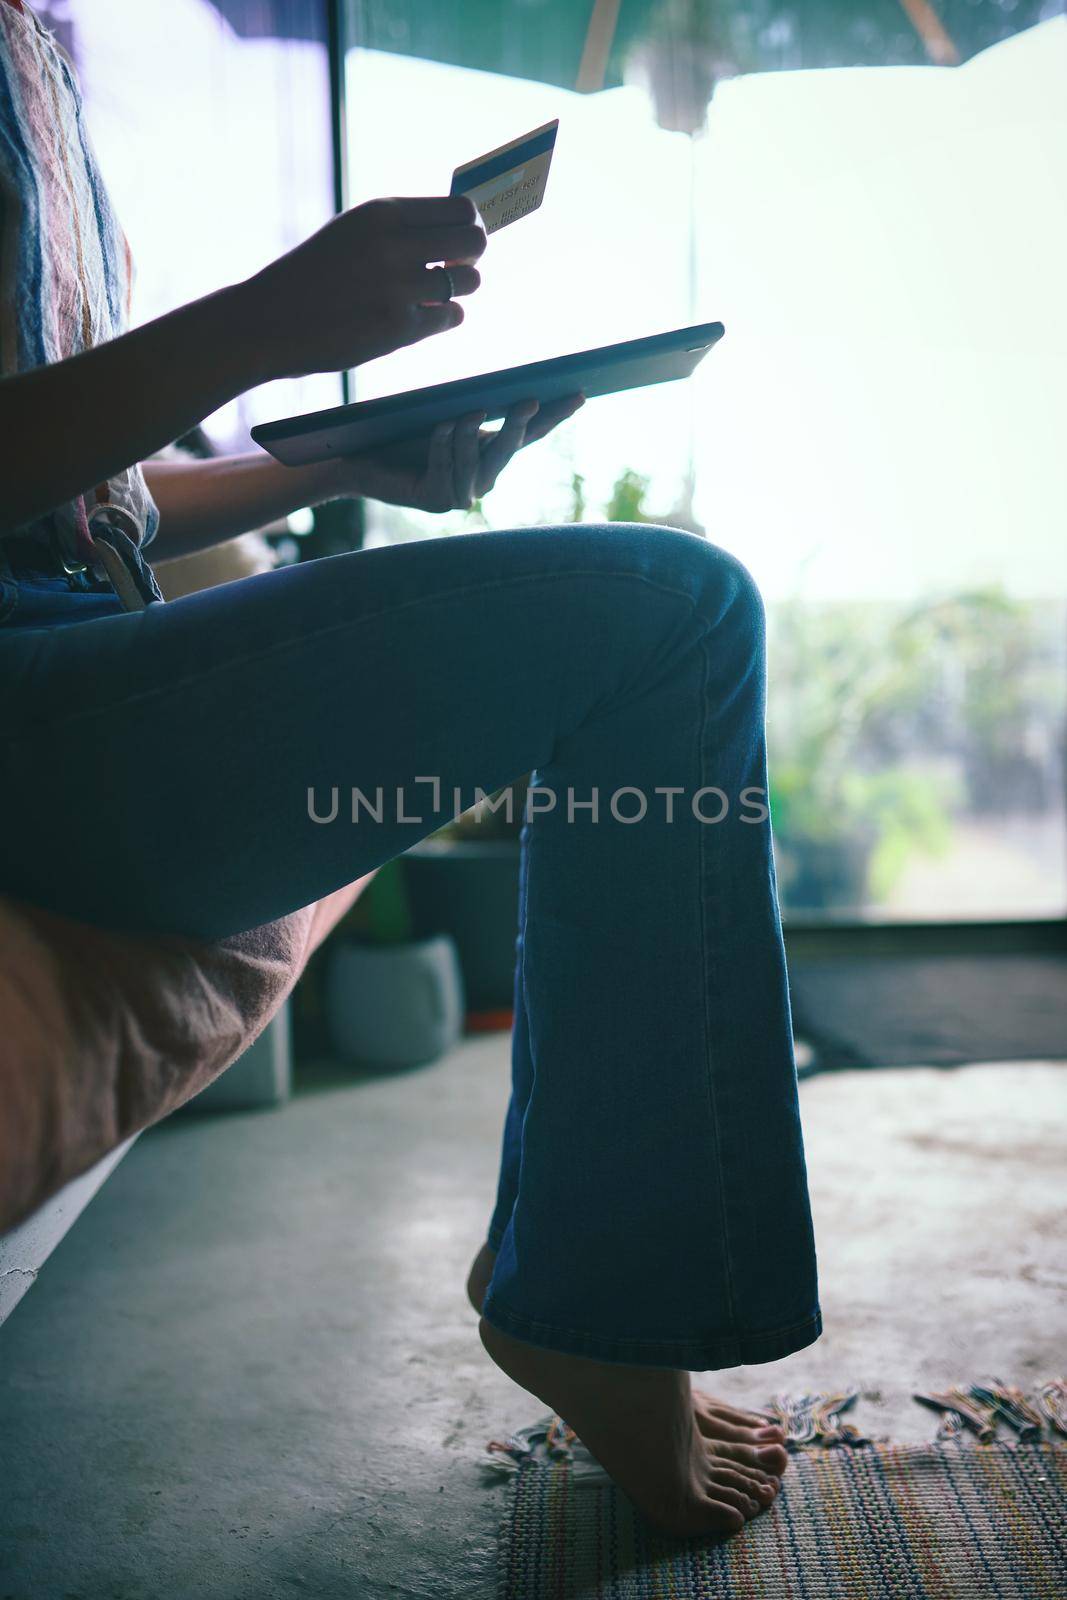 Silhouette Shot of hands holding a credit card and a tablet